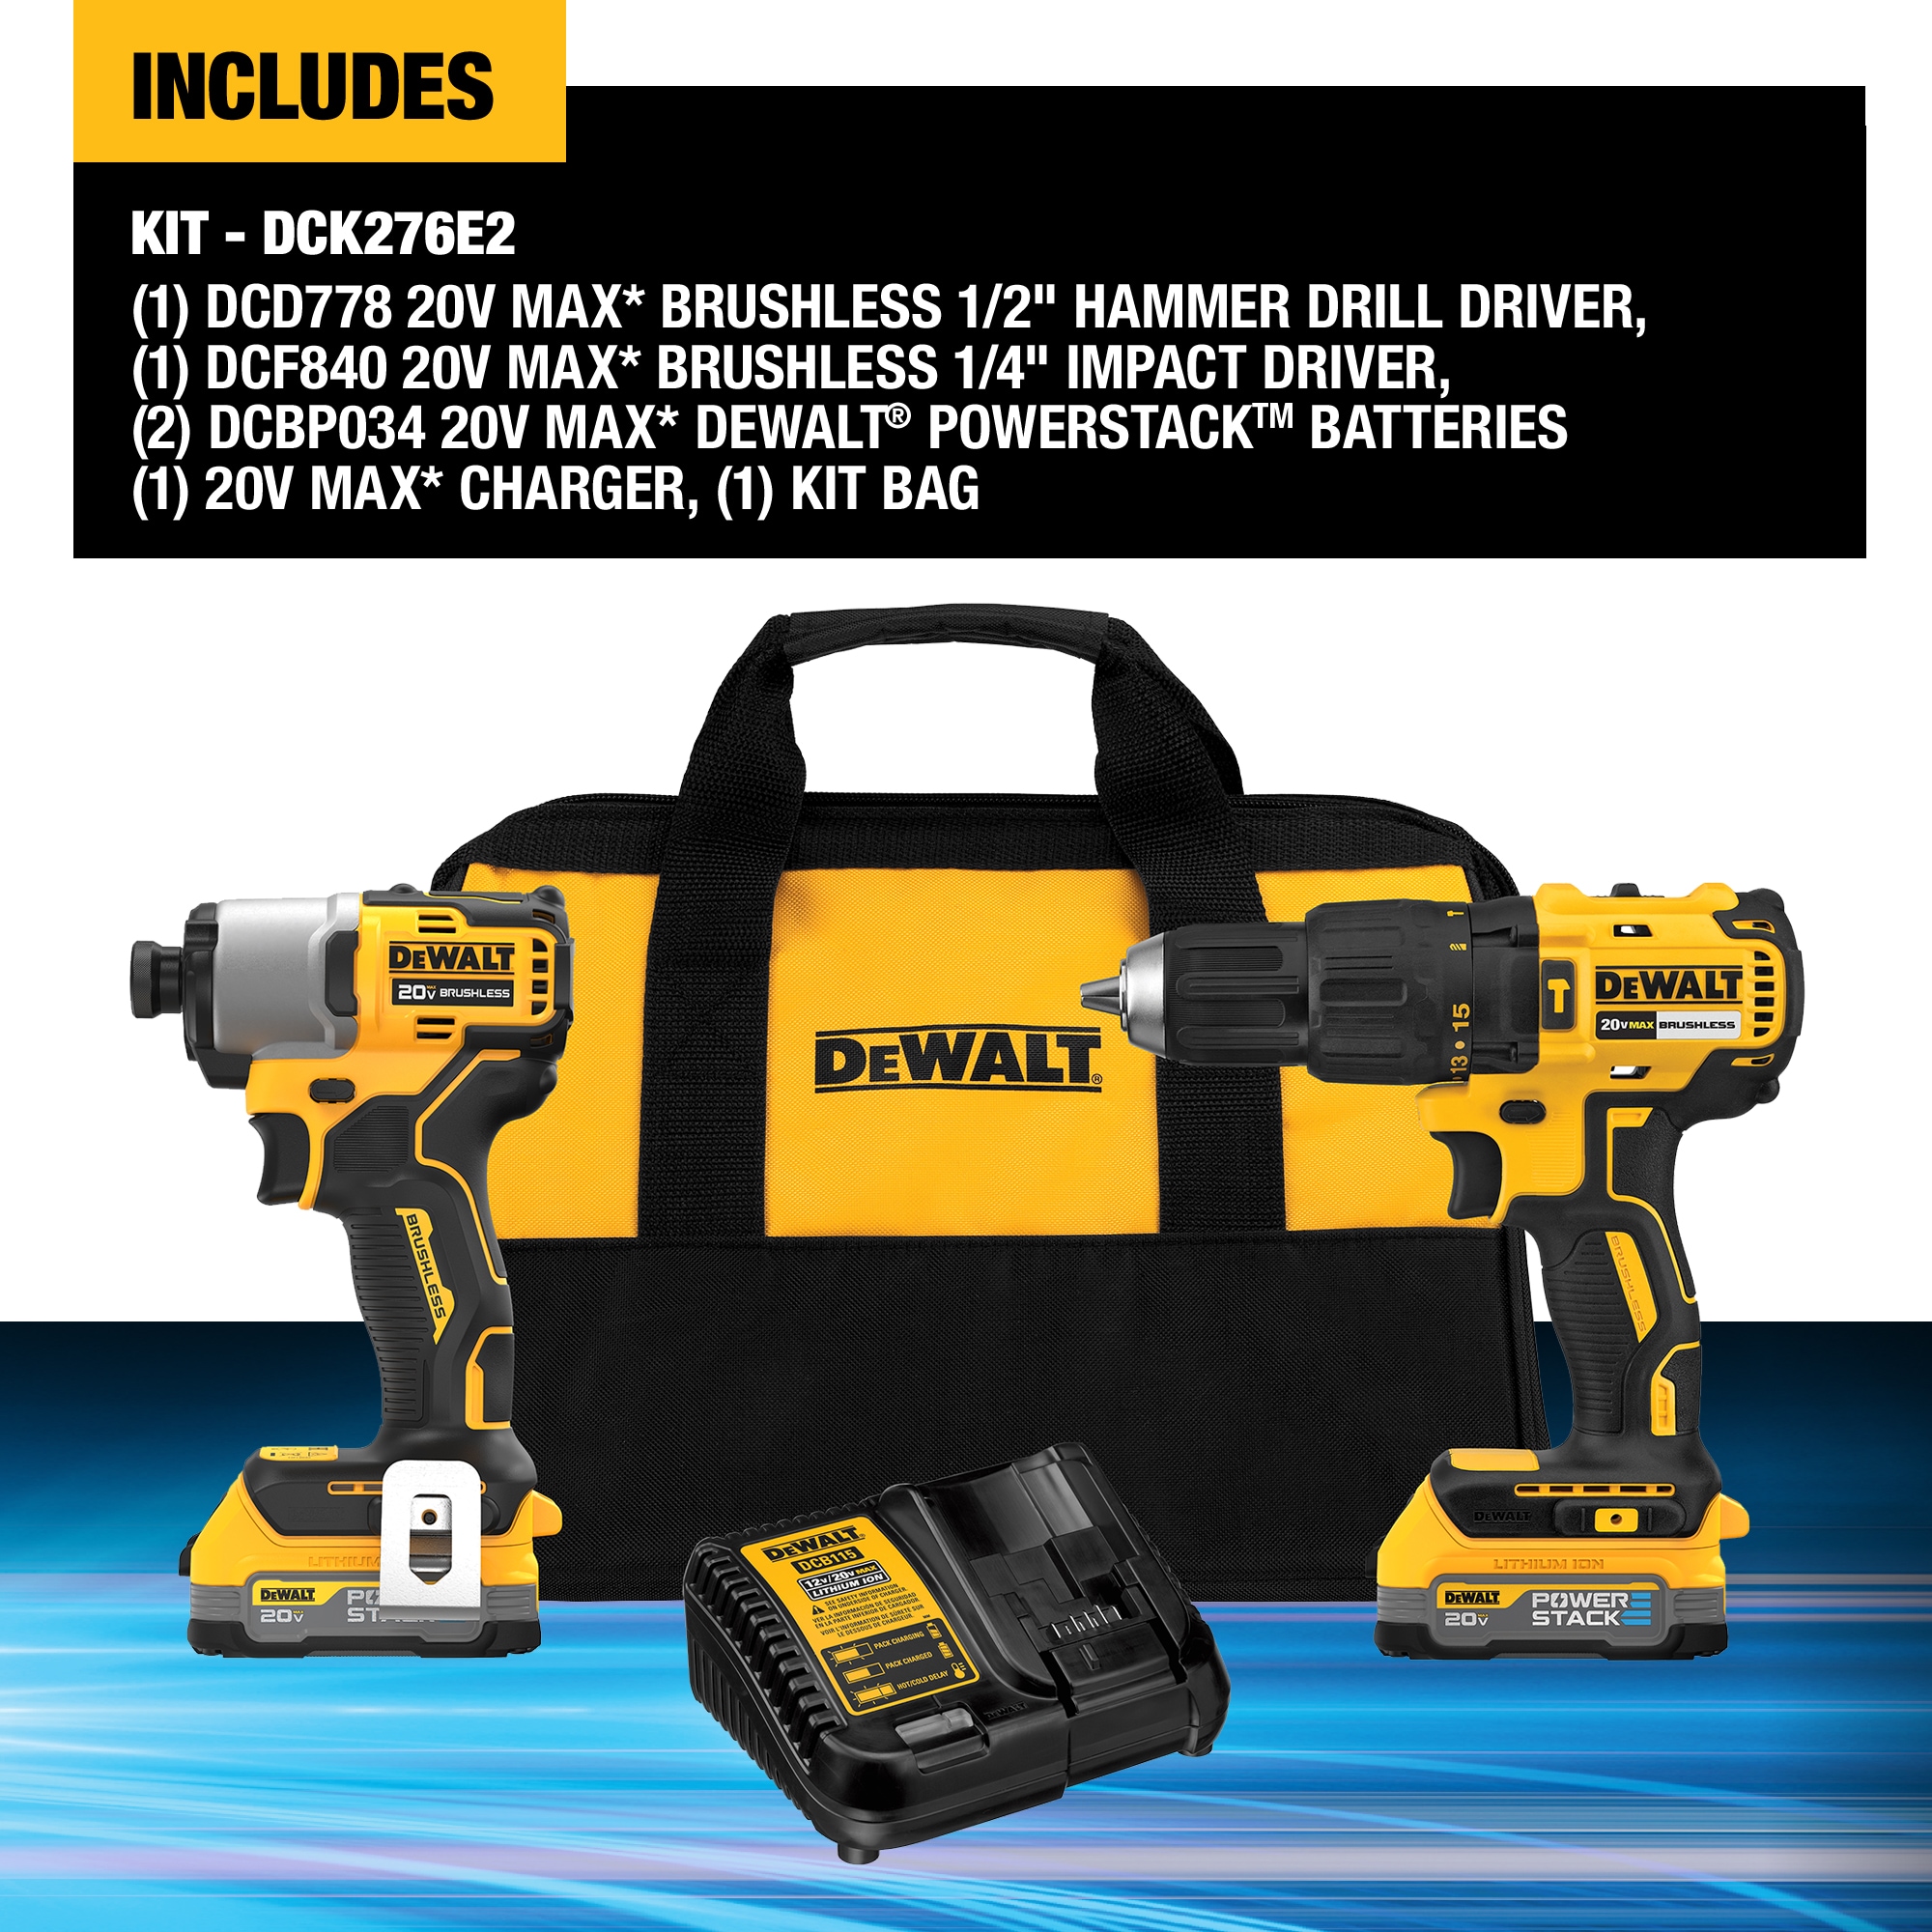 DEWALT 20V MAX Brushless Cordless Hammer Drill/Driver and Impact Driver Combo with DEWALT POWERSTACK Compact Batteries in the Power Tool Combo Kits department at Lowes.com